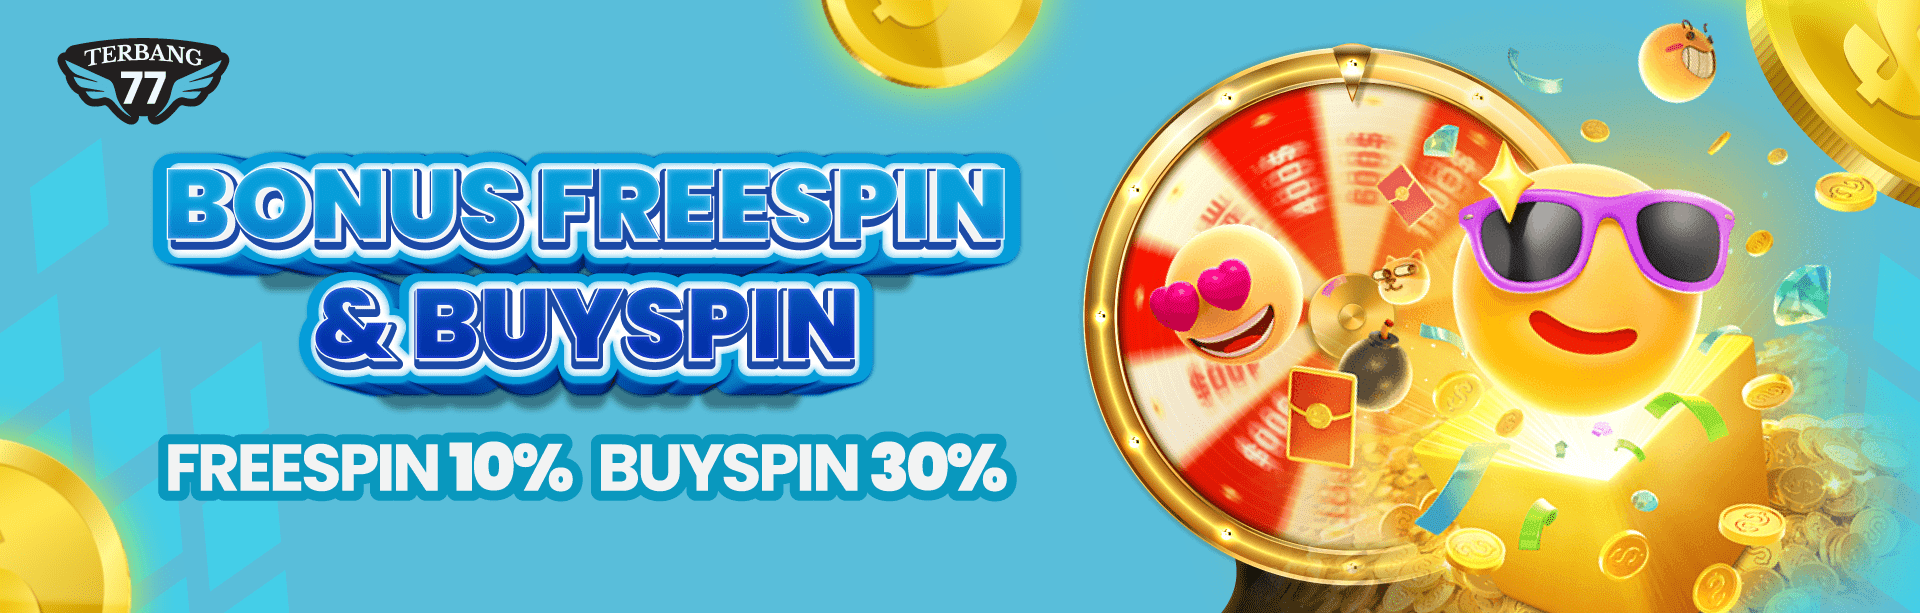 FREE SPIN 10% & BY SPIN 30%